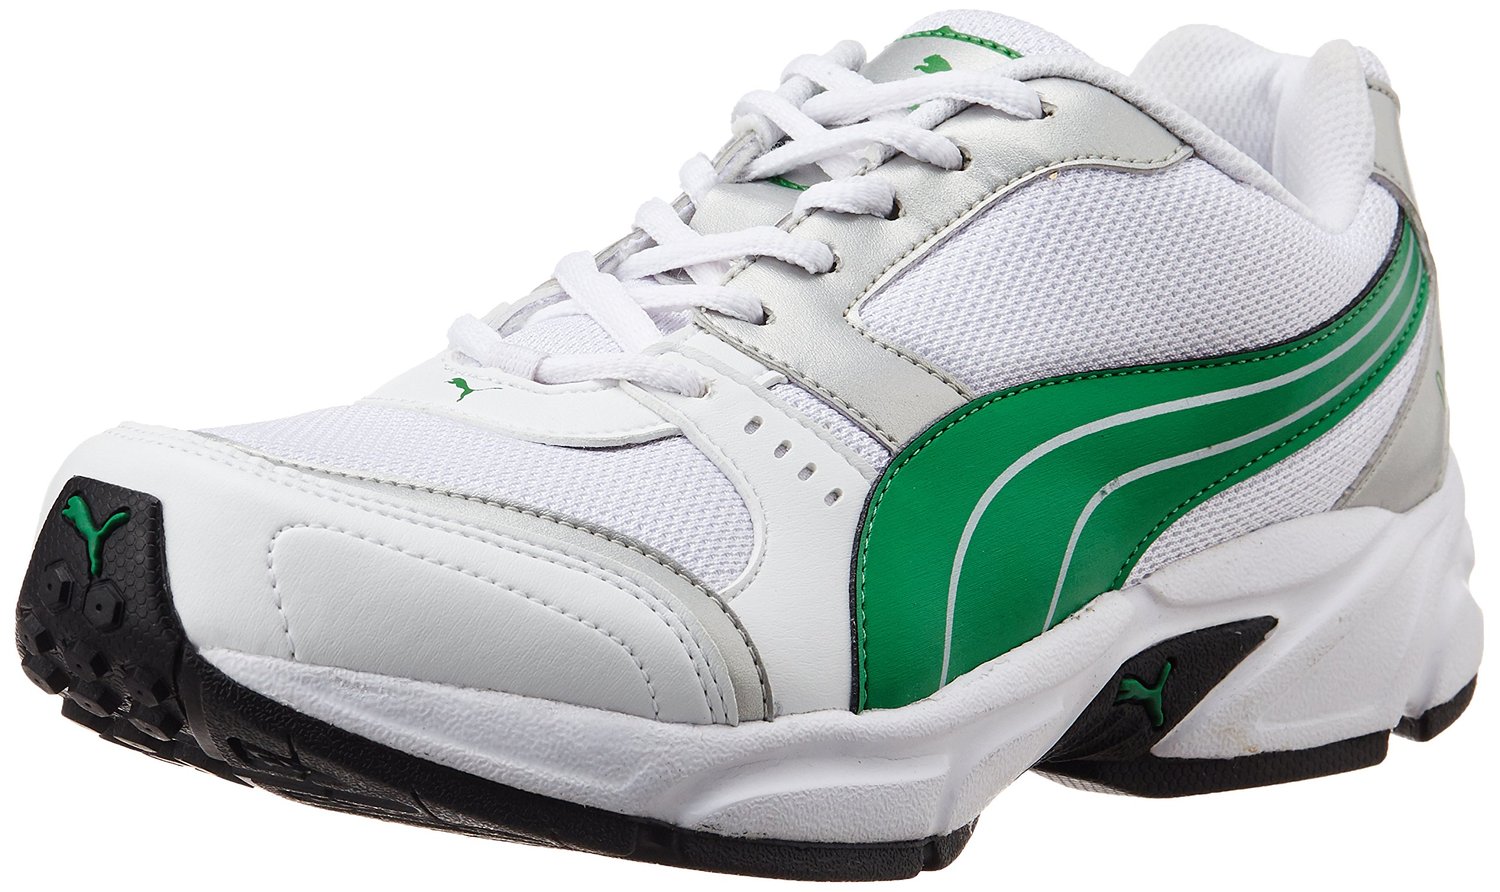 Buy PUMA Men's (White, Green) Running Shoes Online @ ₹3999 from ShopClues